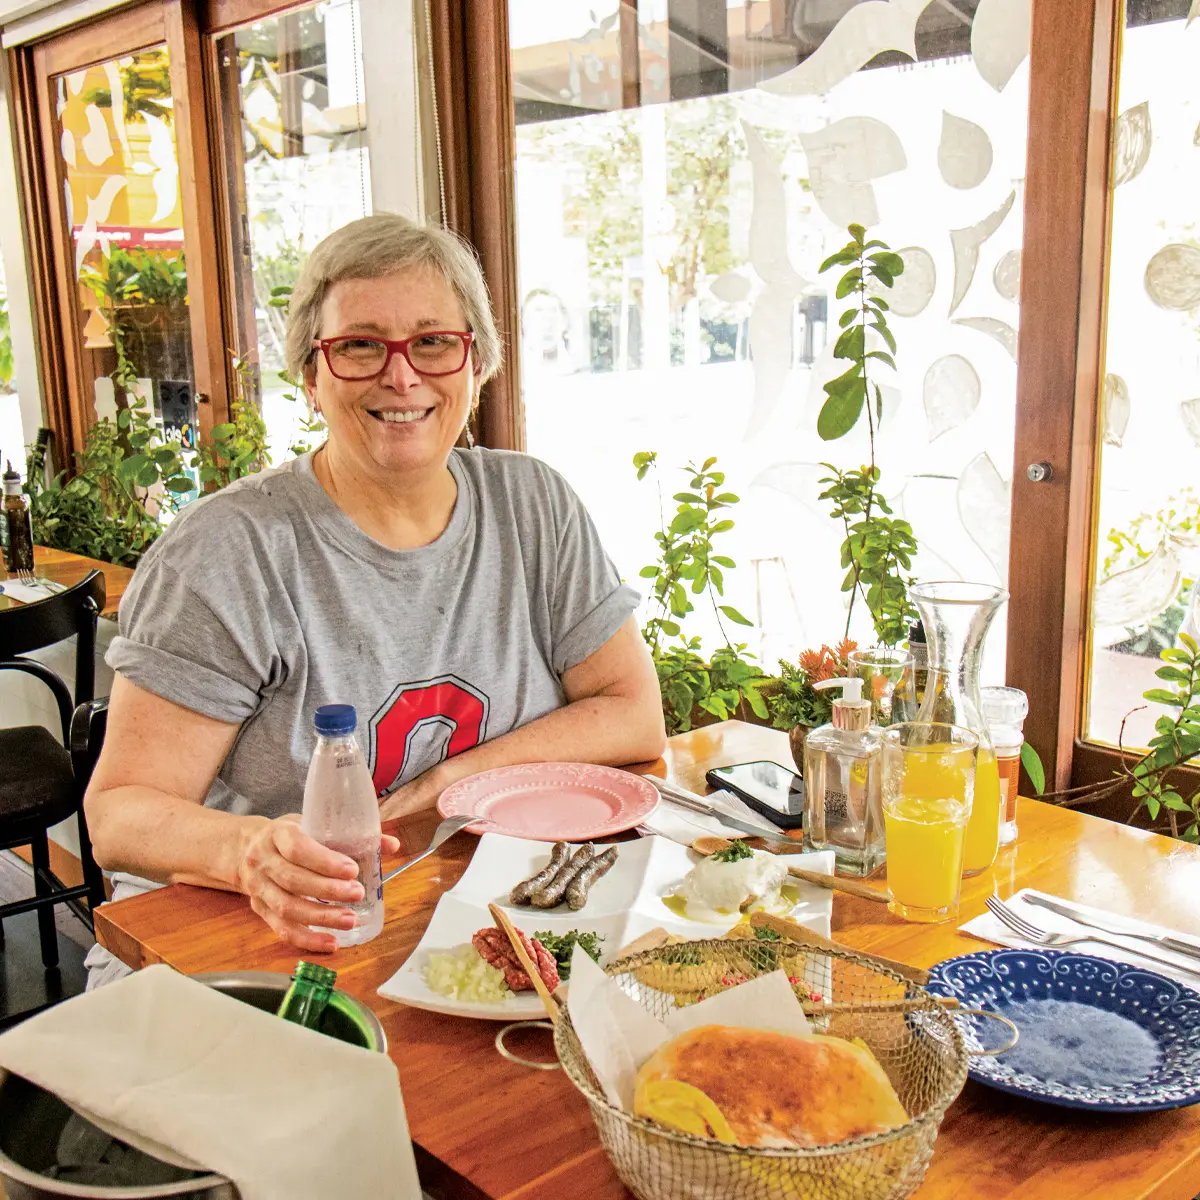 A woman smiles at a restaurant table. Her scarlet glasses match the color of the Block O on her T-shirt. Sunlight streams in windows behind her, plants grow on the sill, and colorful plates sit on her table awaiting the food.